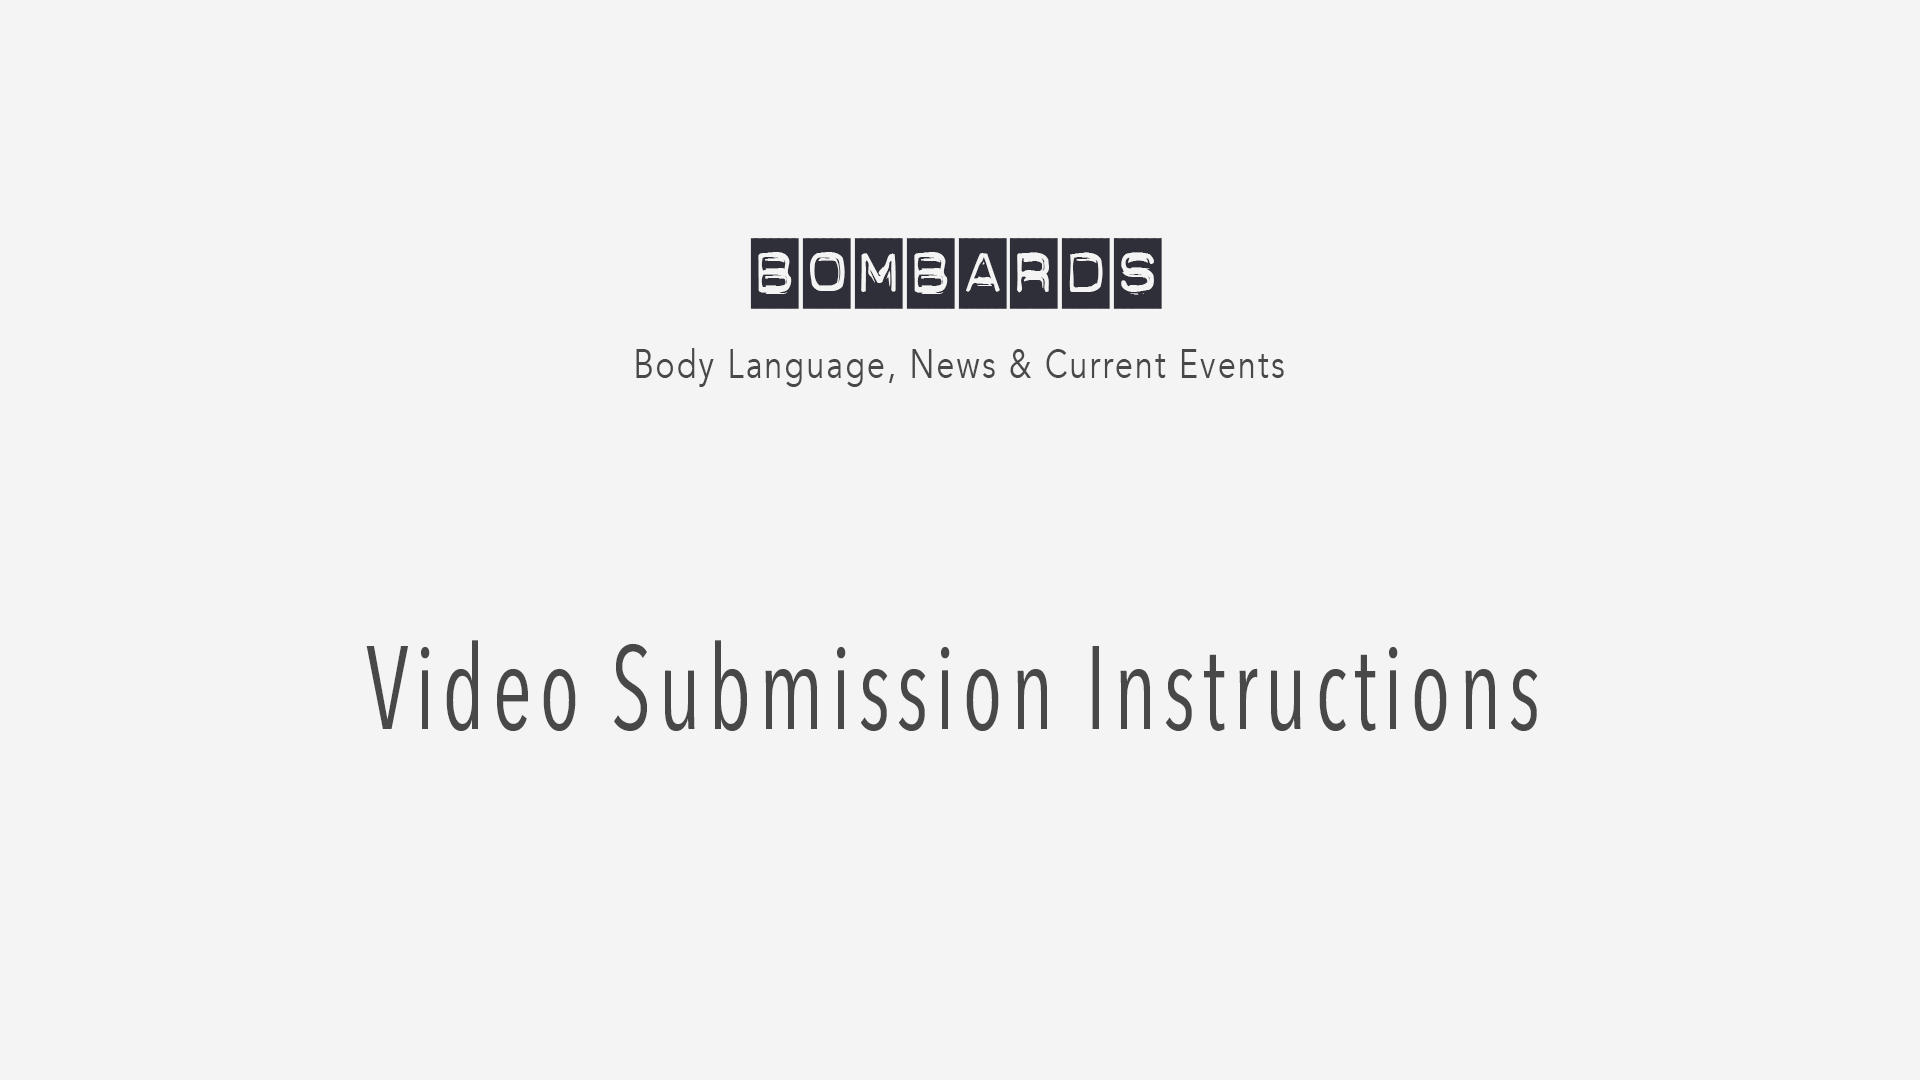 Body Language Video Submission